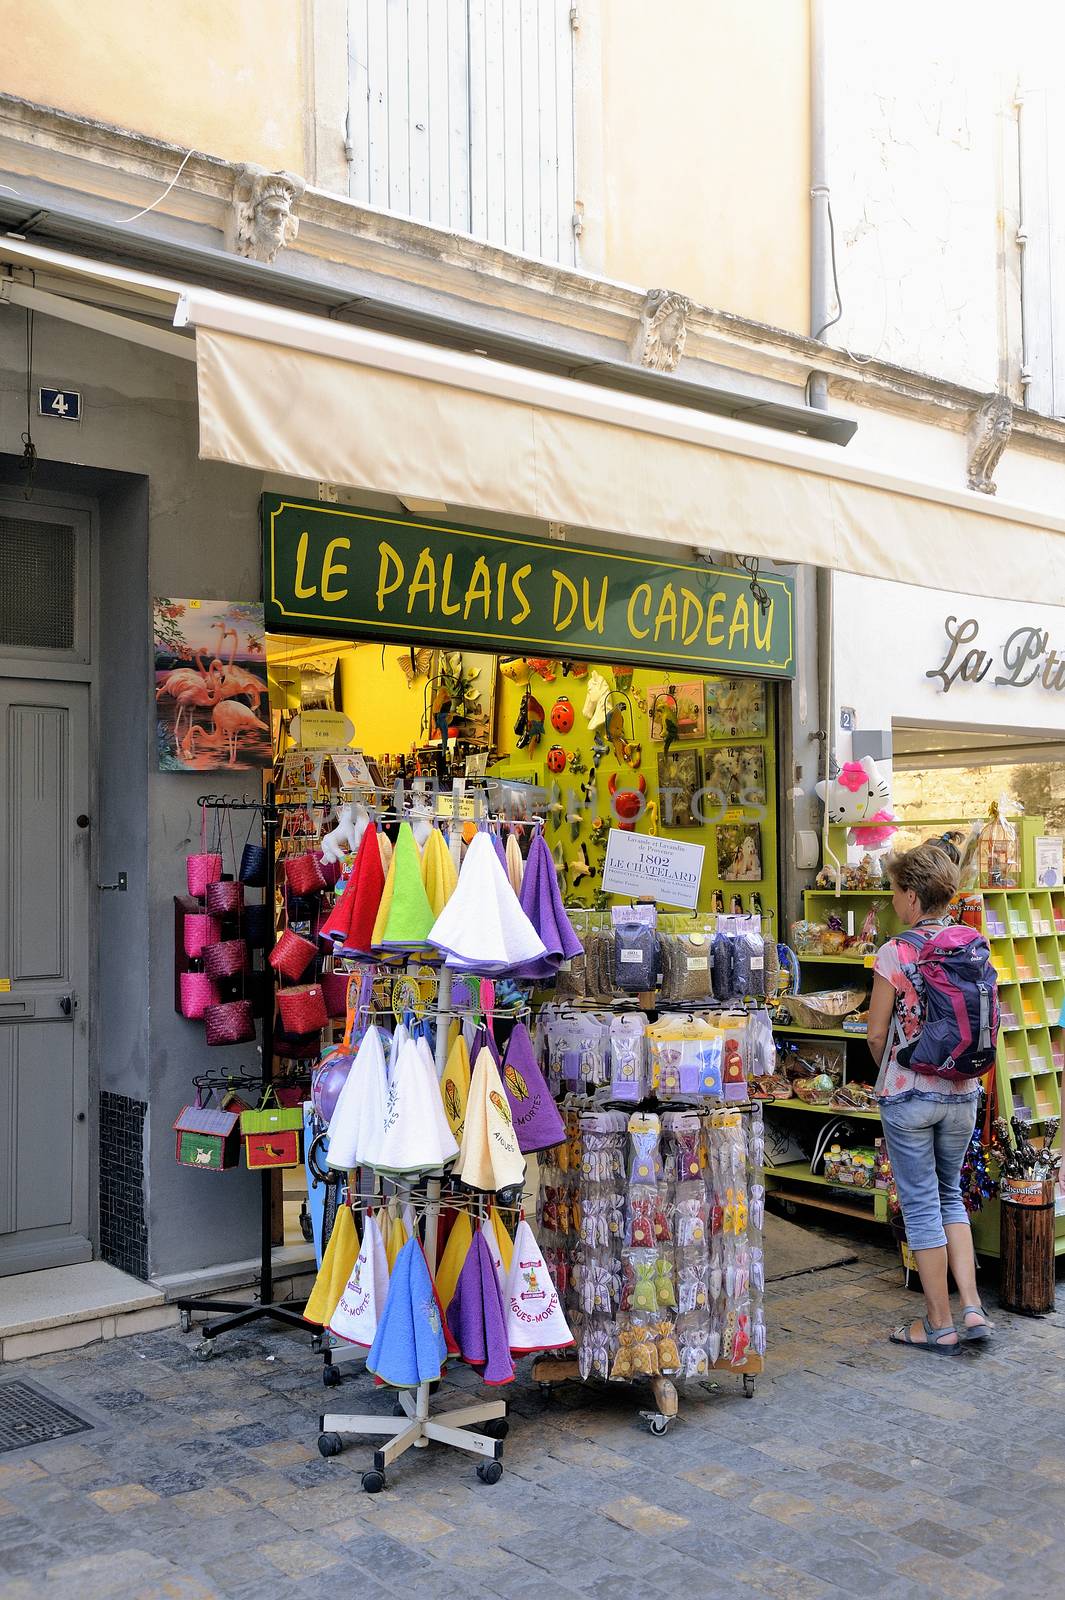 Souvenirs and gadgets in Aigues-Mortes street, Camargue in the south-east of France.